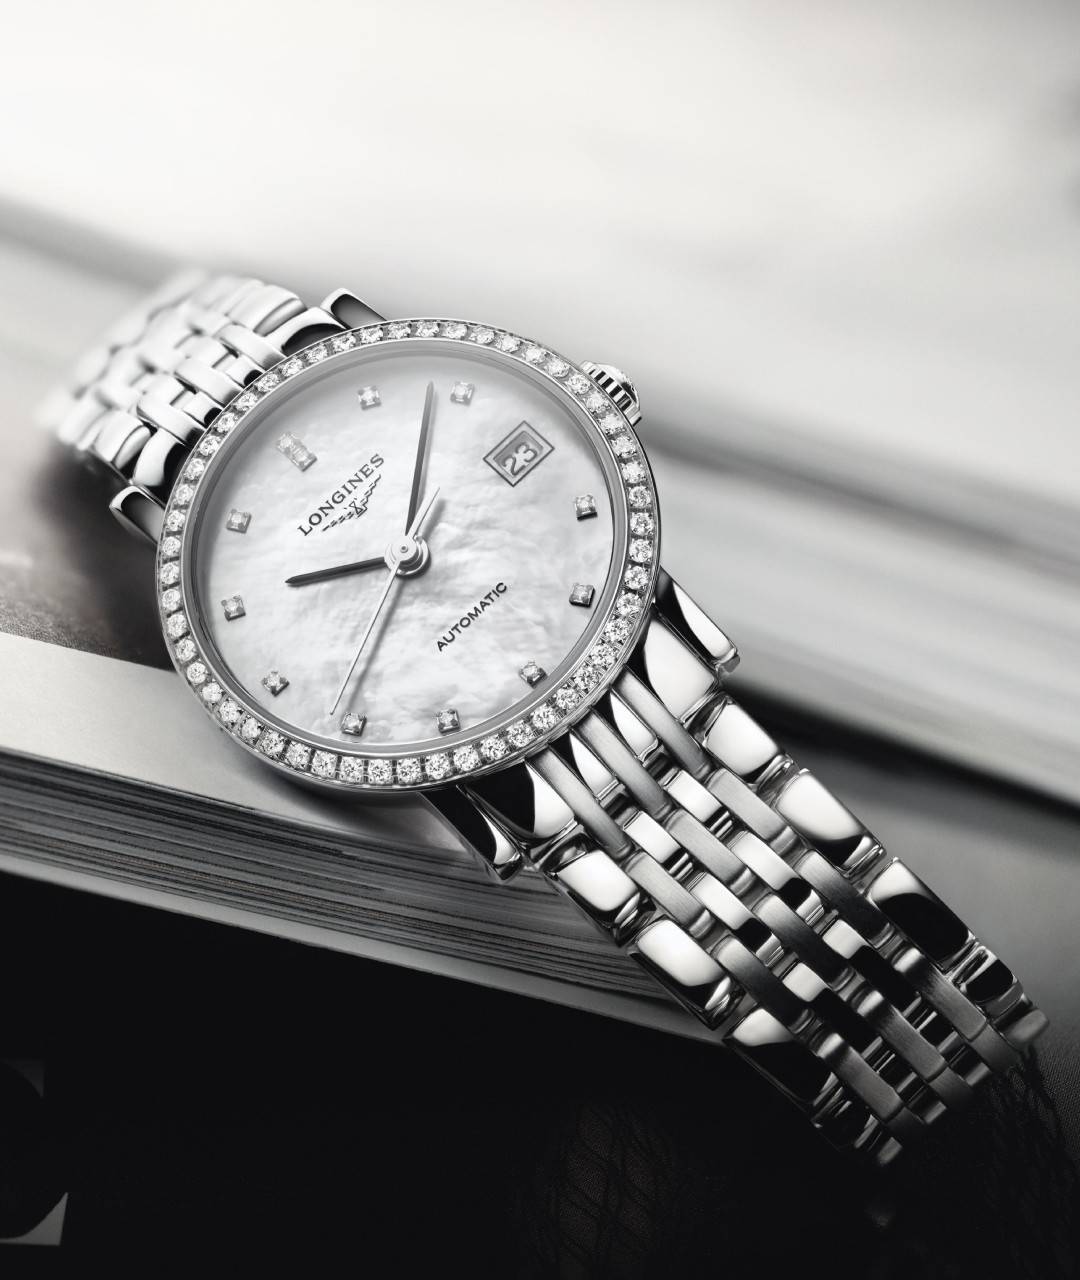 The Longines Elegant Collection from Longines